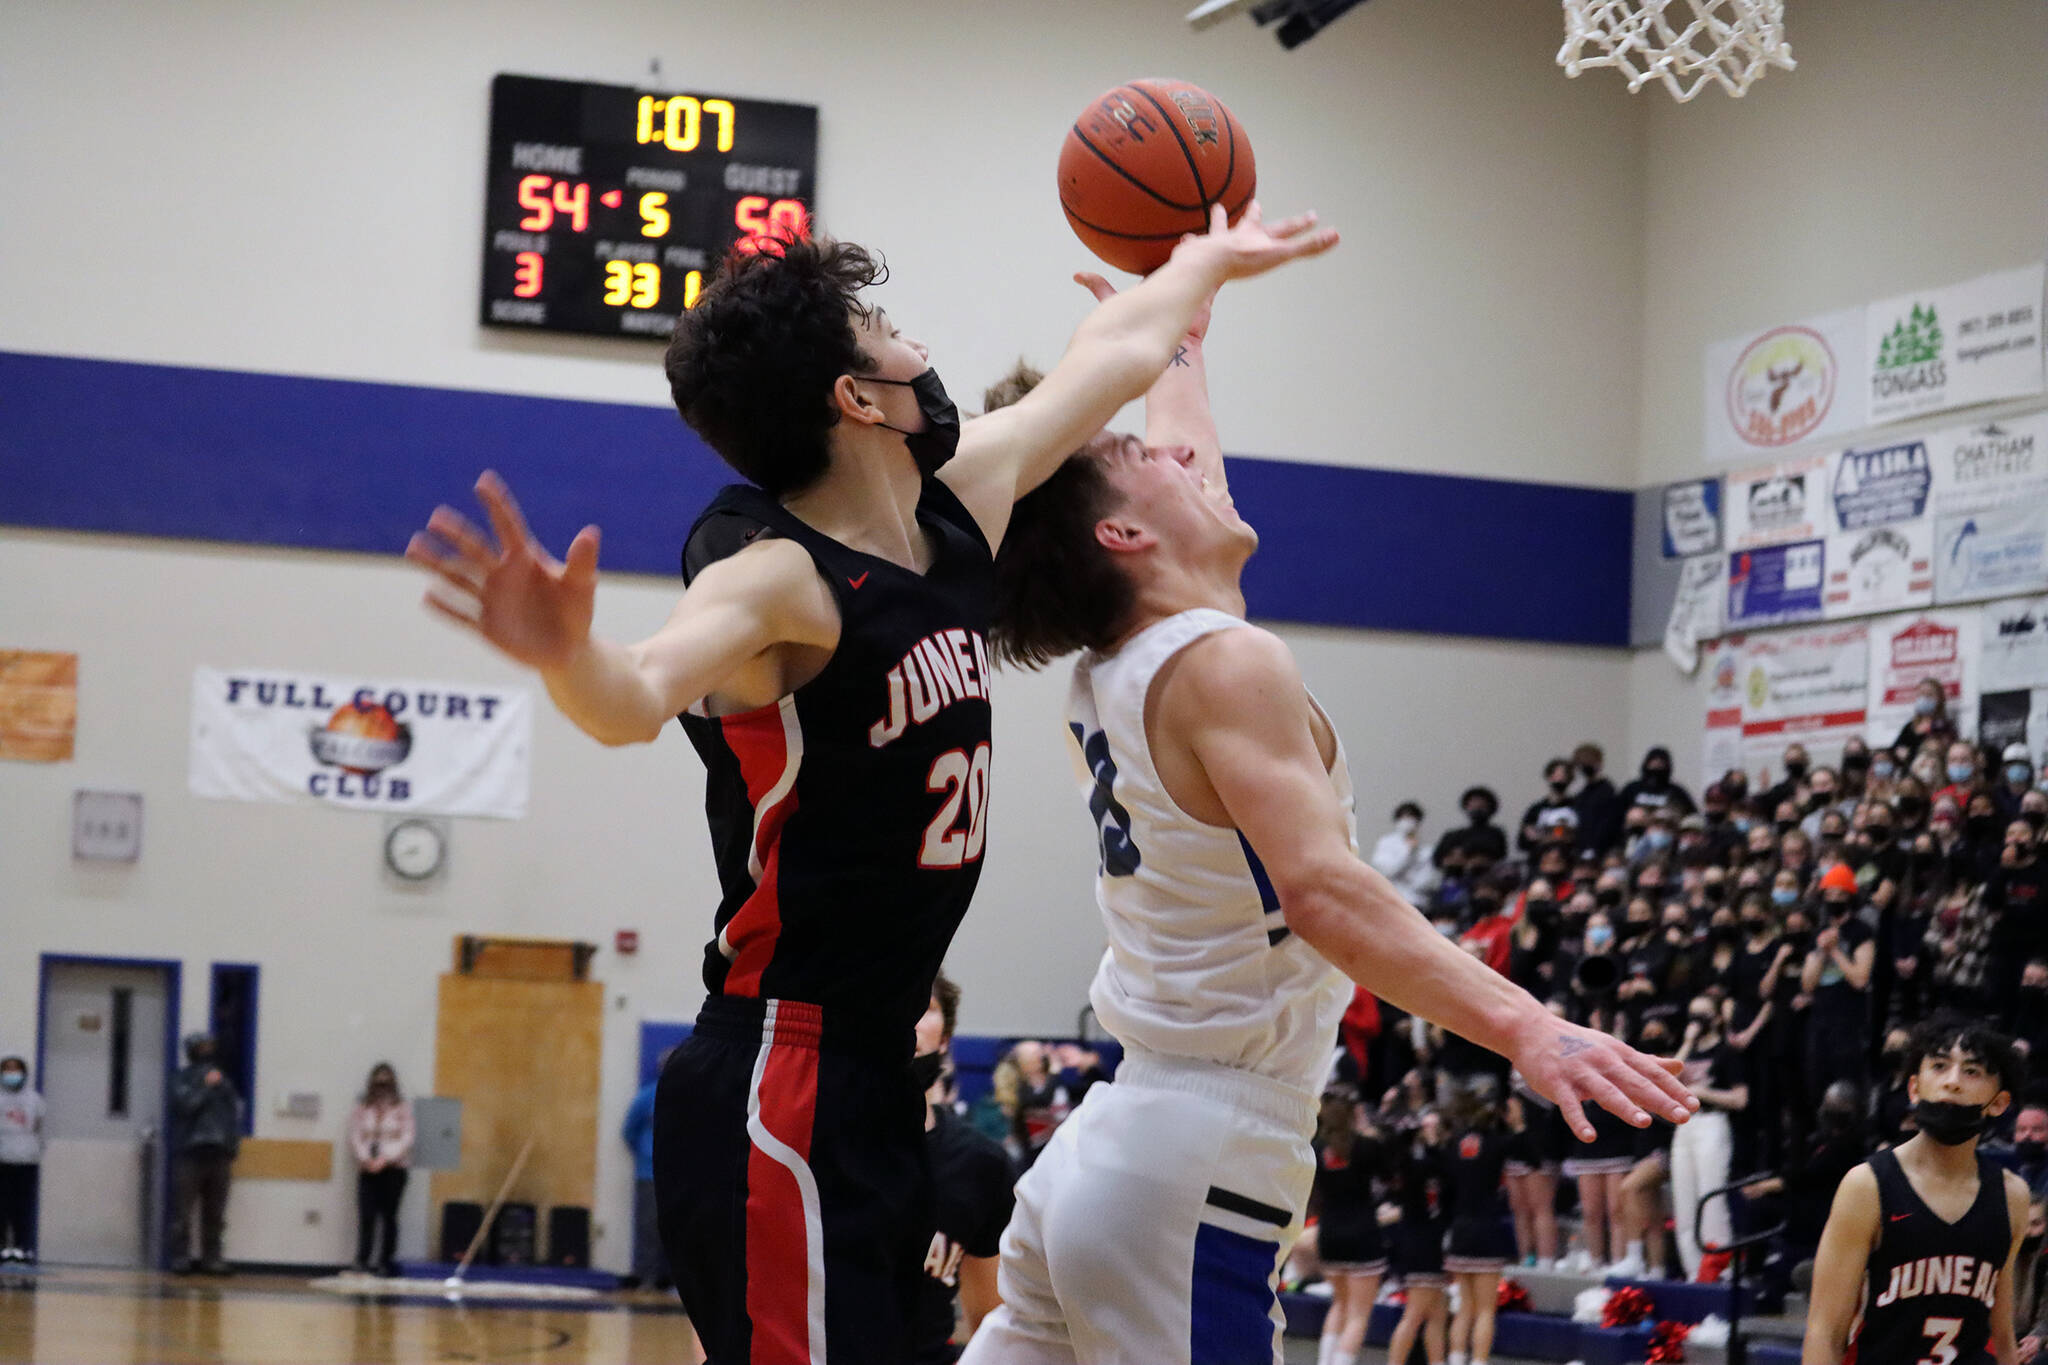 JDHS' Orion Dybdahl contests a shot from TMHS' Thomas Baxter late in Saturday night's game. Thunder Mountain High School wound up winning 56-55 in overtime.  (Ben Hohenstatt / Juneau Empire)